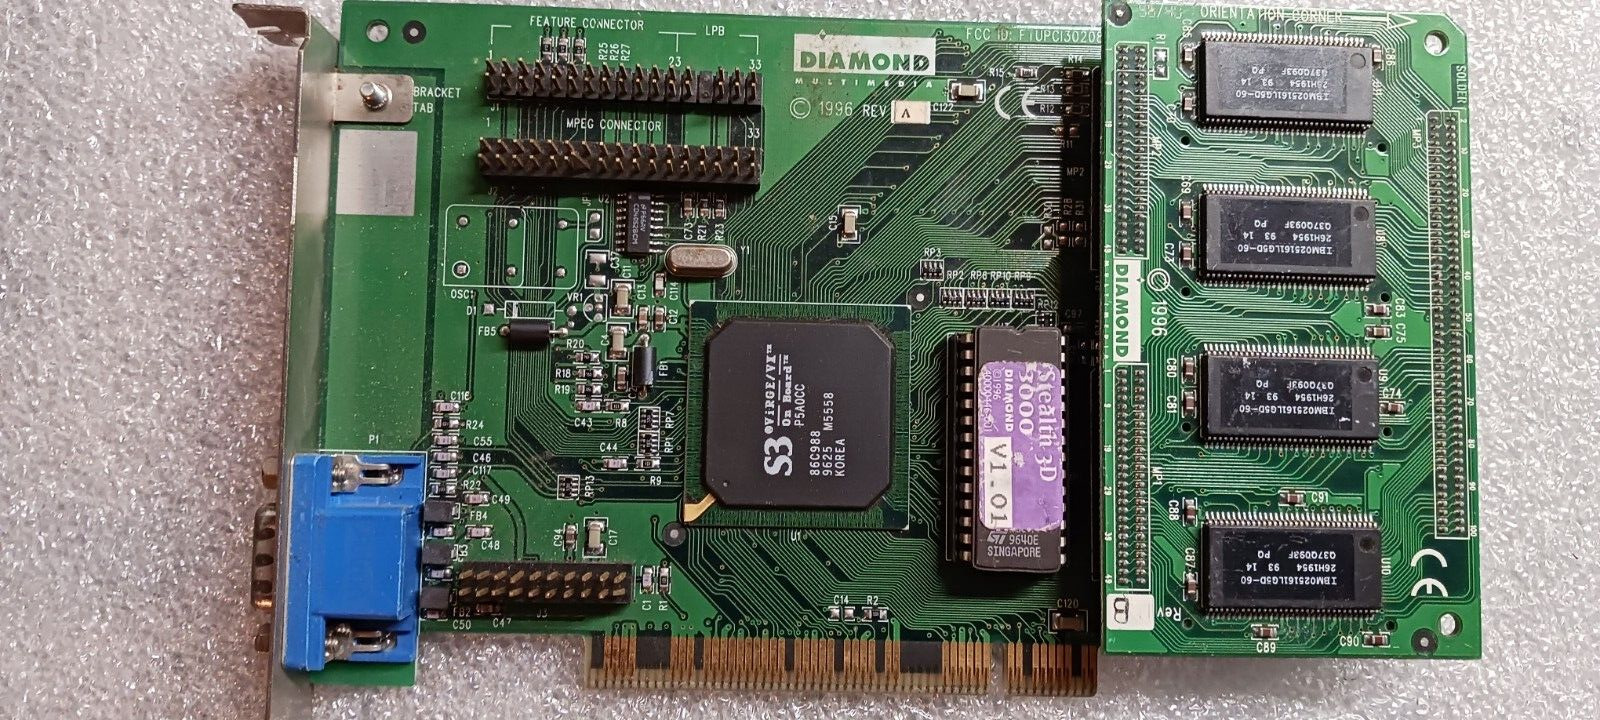 Tested ~ Vintage 1996 Diamond Stealth 3D 3000 PCI Video Card + 2MB Retro Gaming